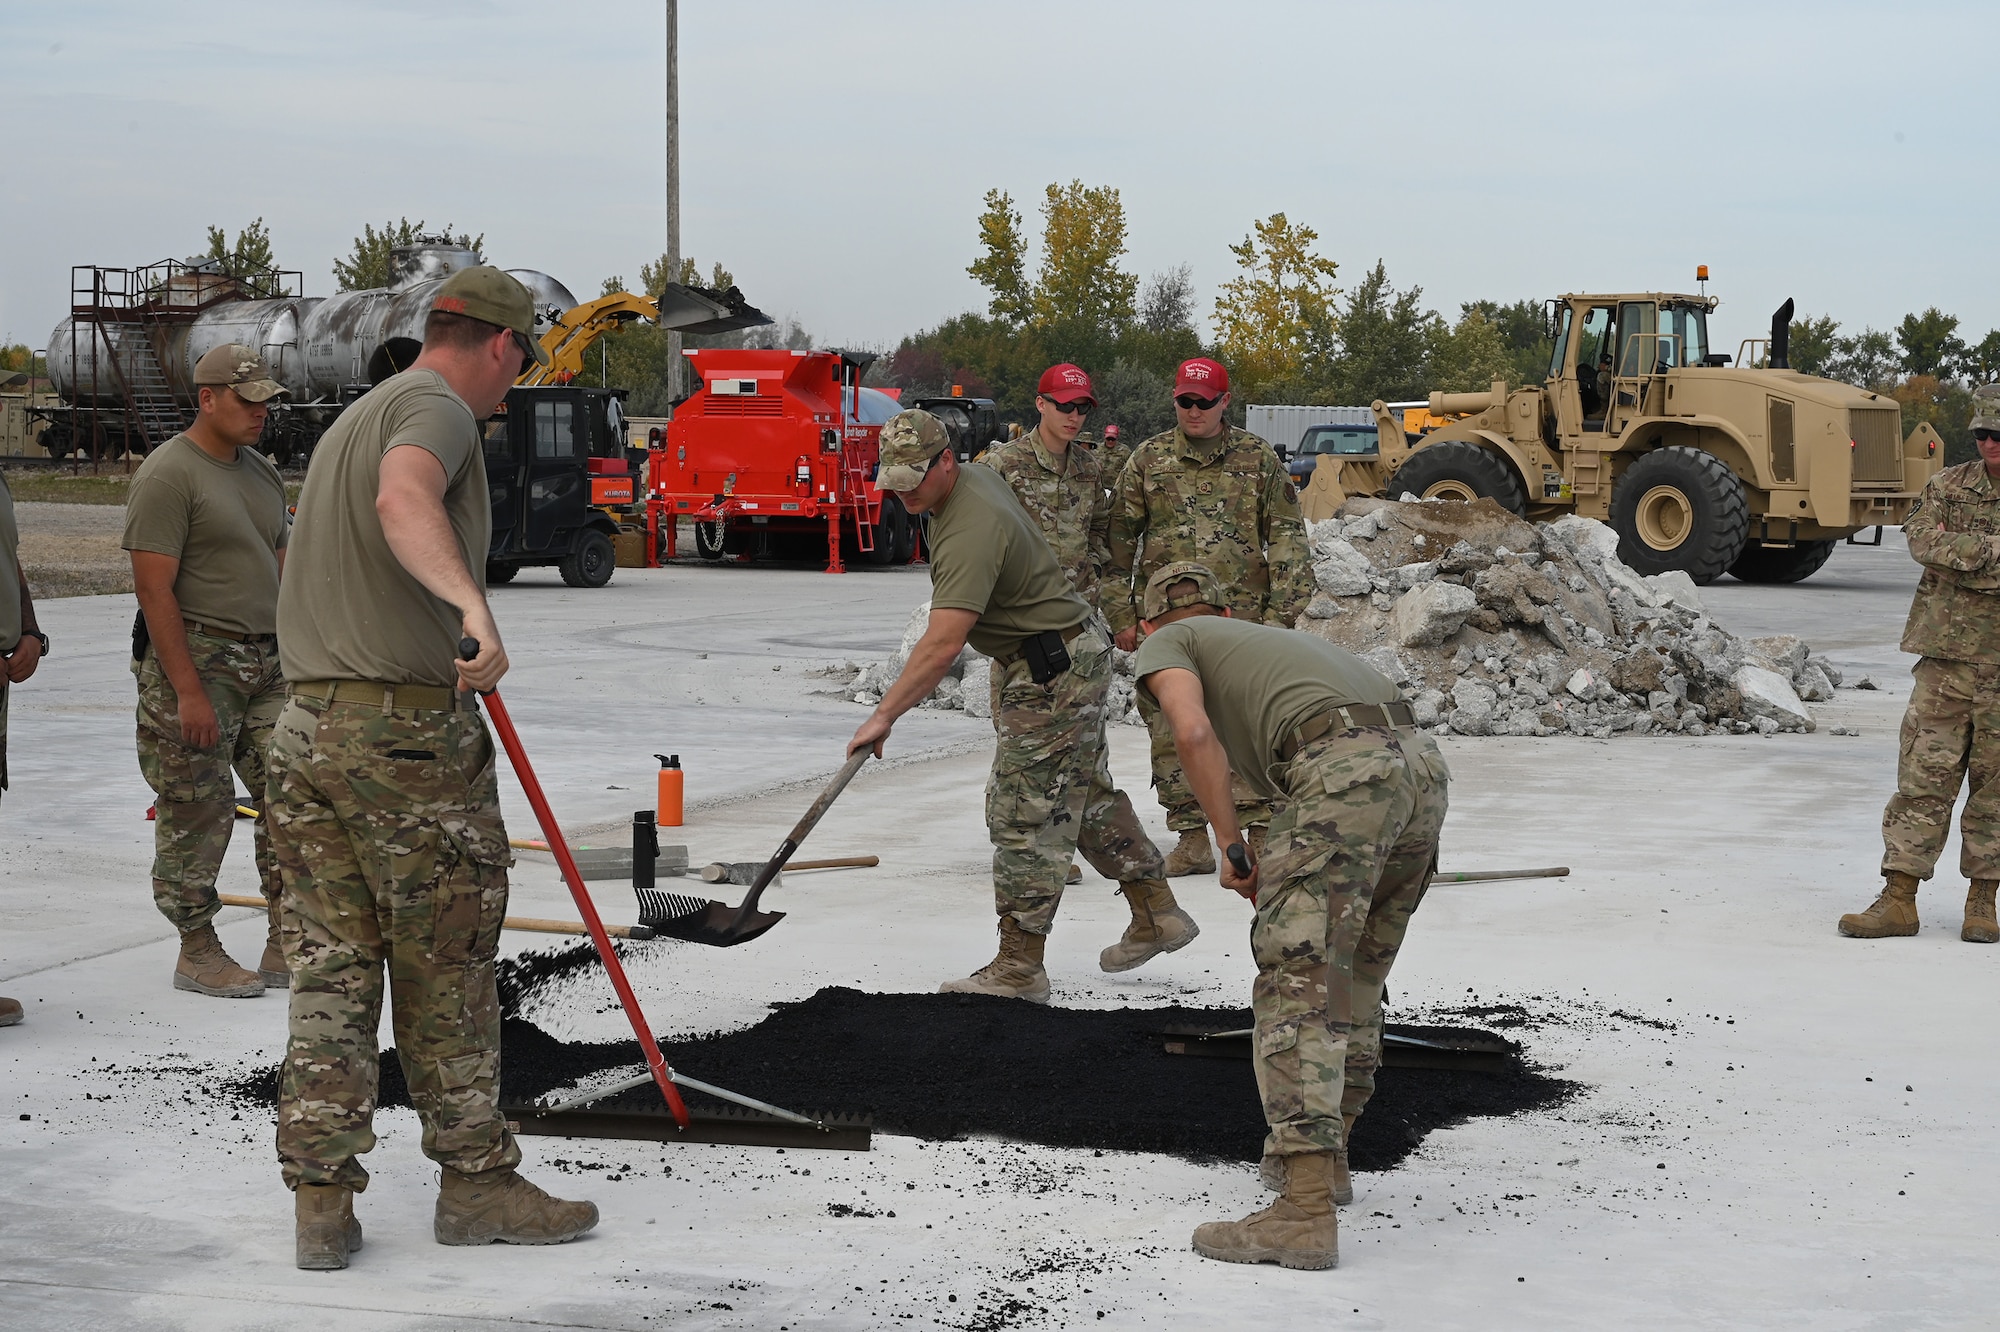 Three military members use rakes to smooth out asphalt material used to patch a square hole on a concreate training runway as several other personnel watch at the North Dakota Air National Guard Regional Training Site, Fargo, N.D., Sept. 29, 2021.